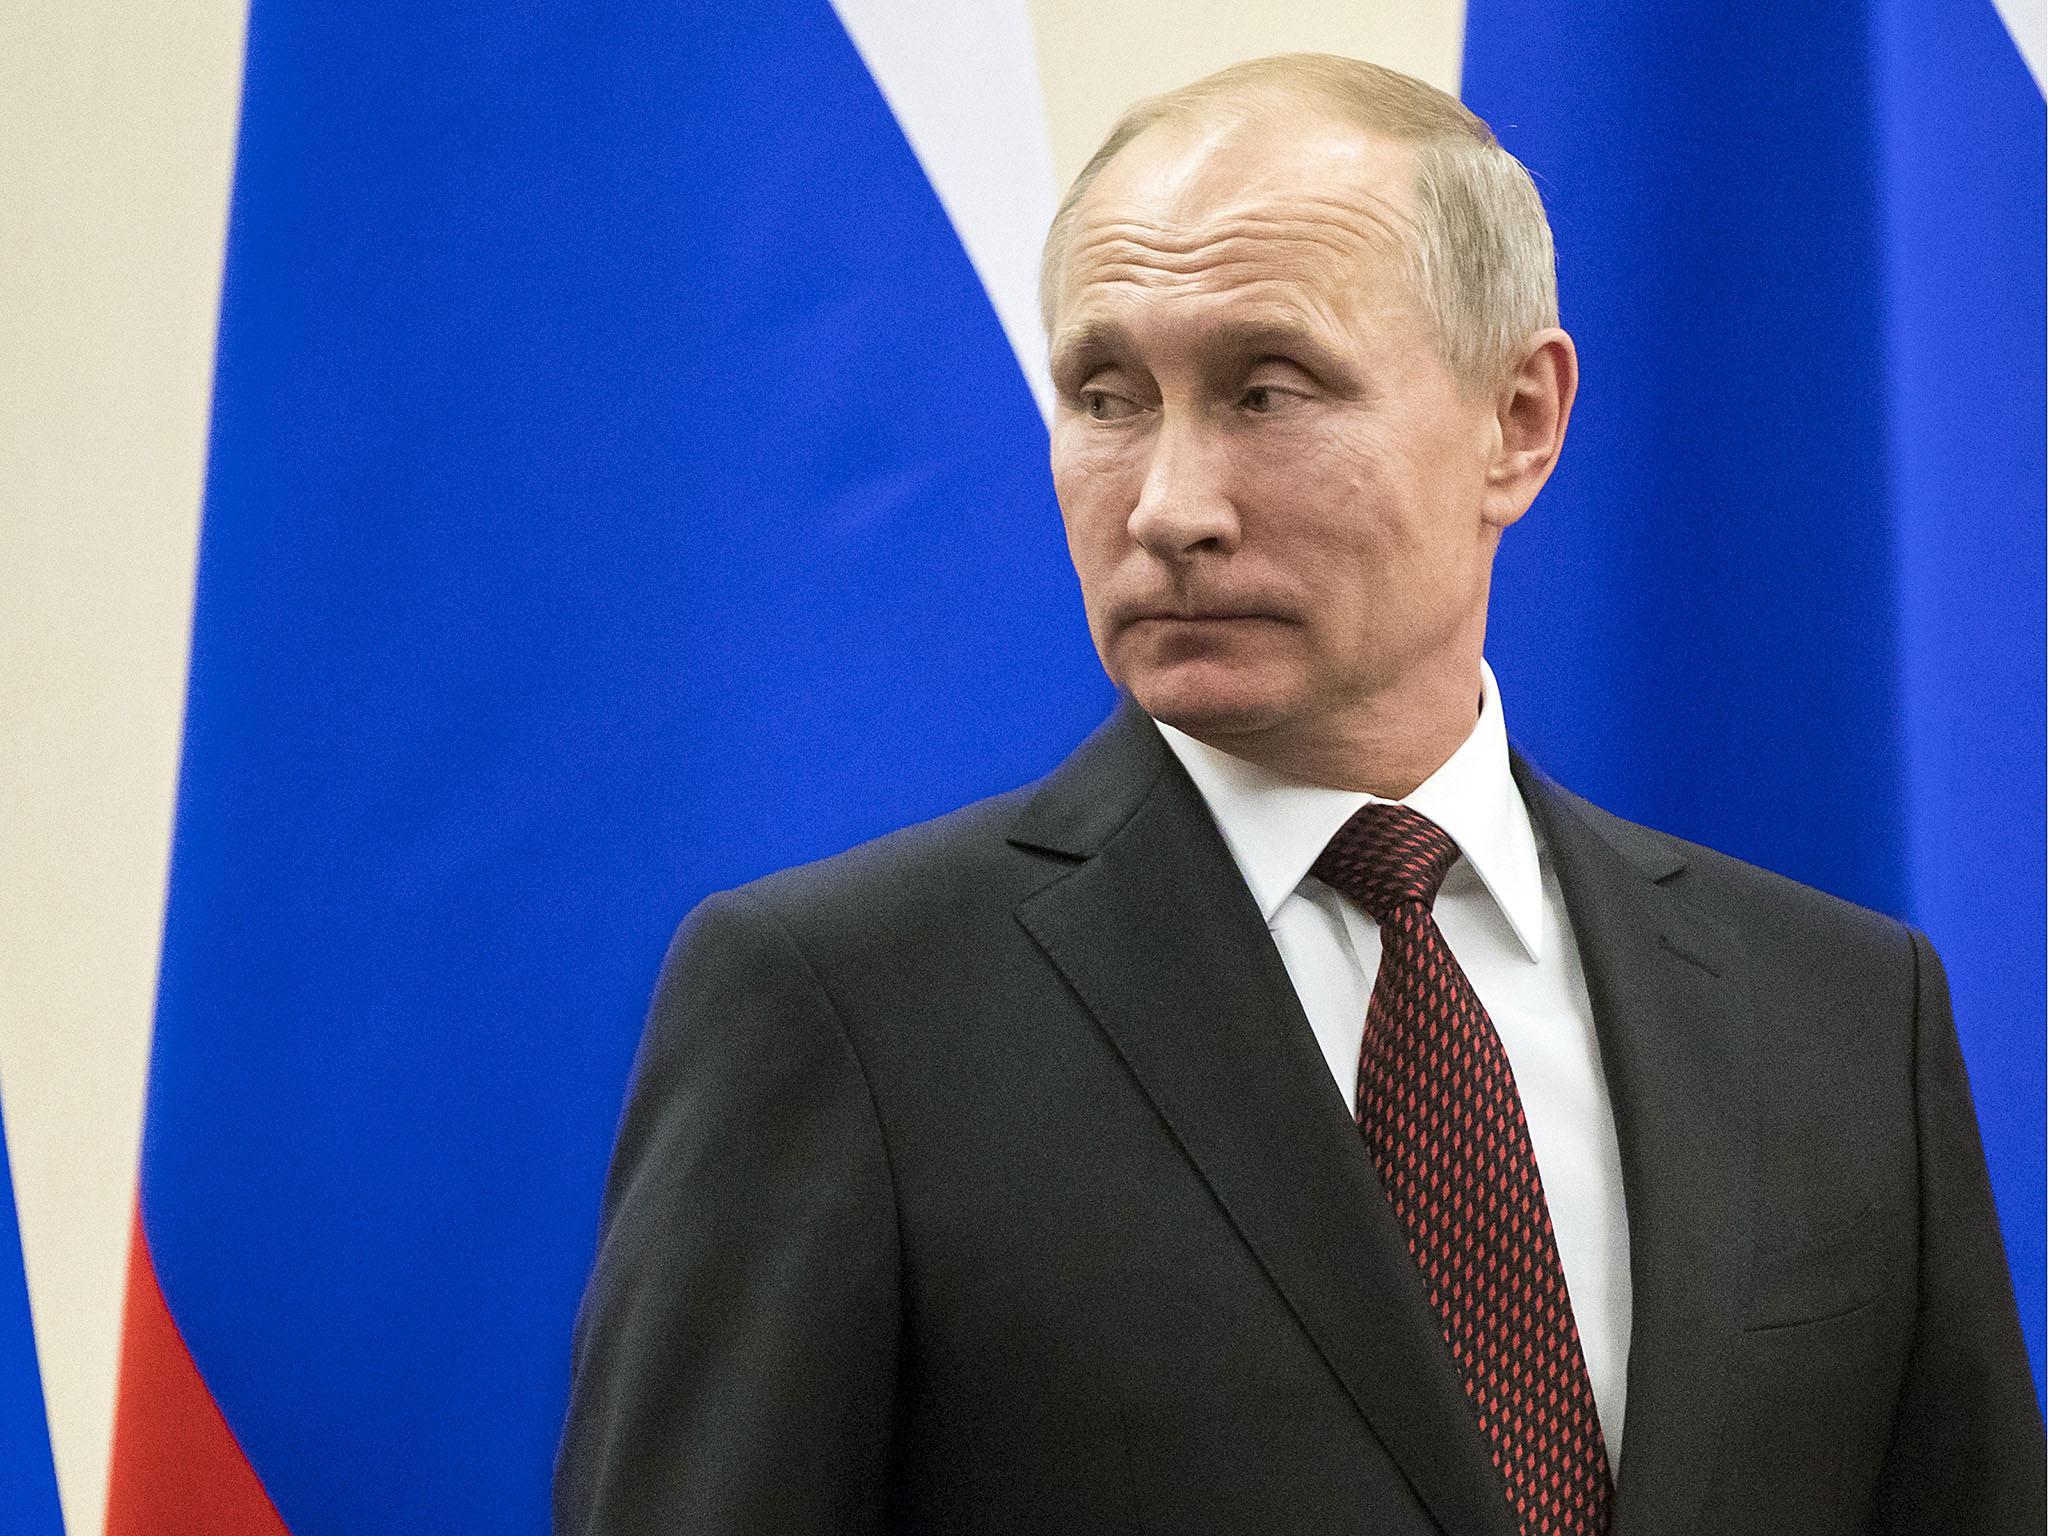 Vladimir Putin is yet to decide whether he will run for re-election in 2018